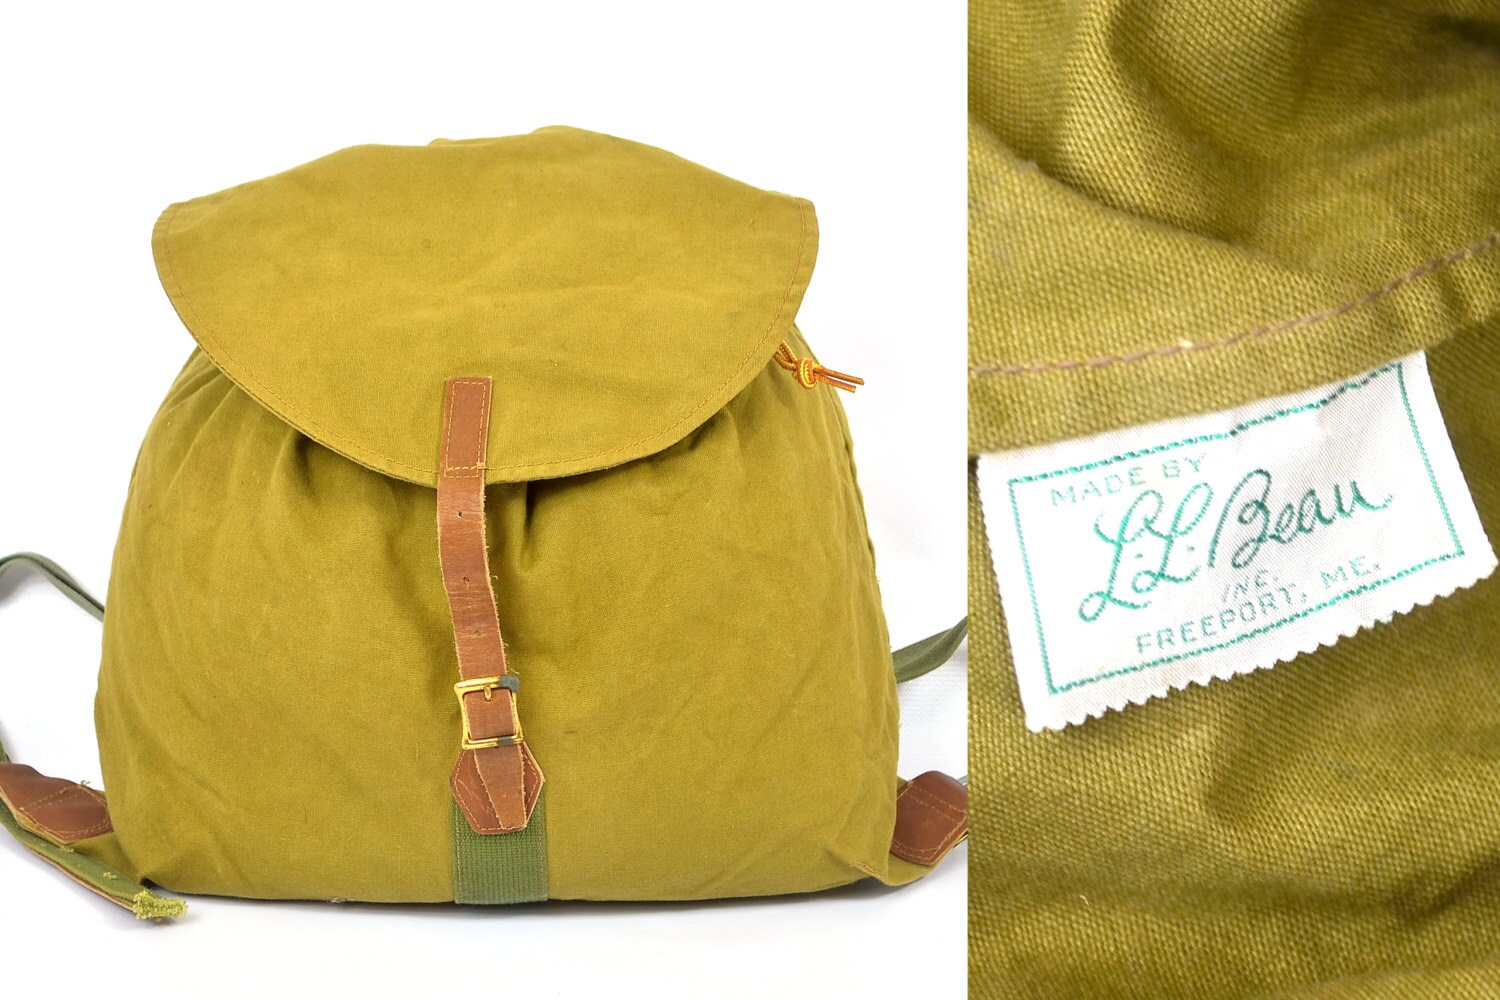 Vintage 1960s Ll Bean Canvas And Leather Rucksack Backpack 9654